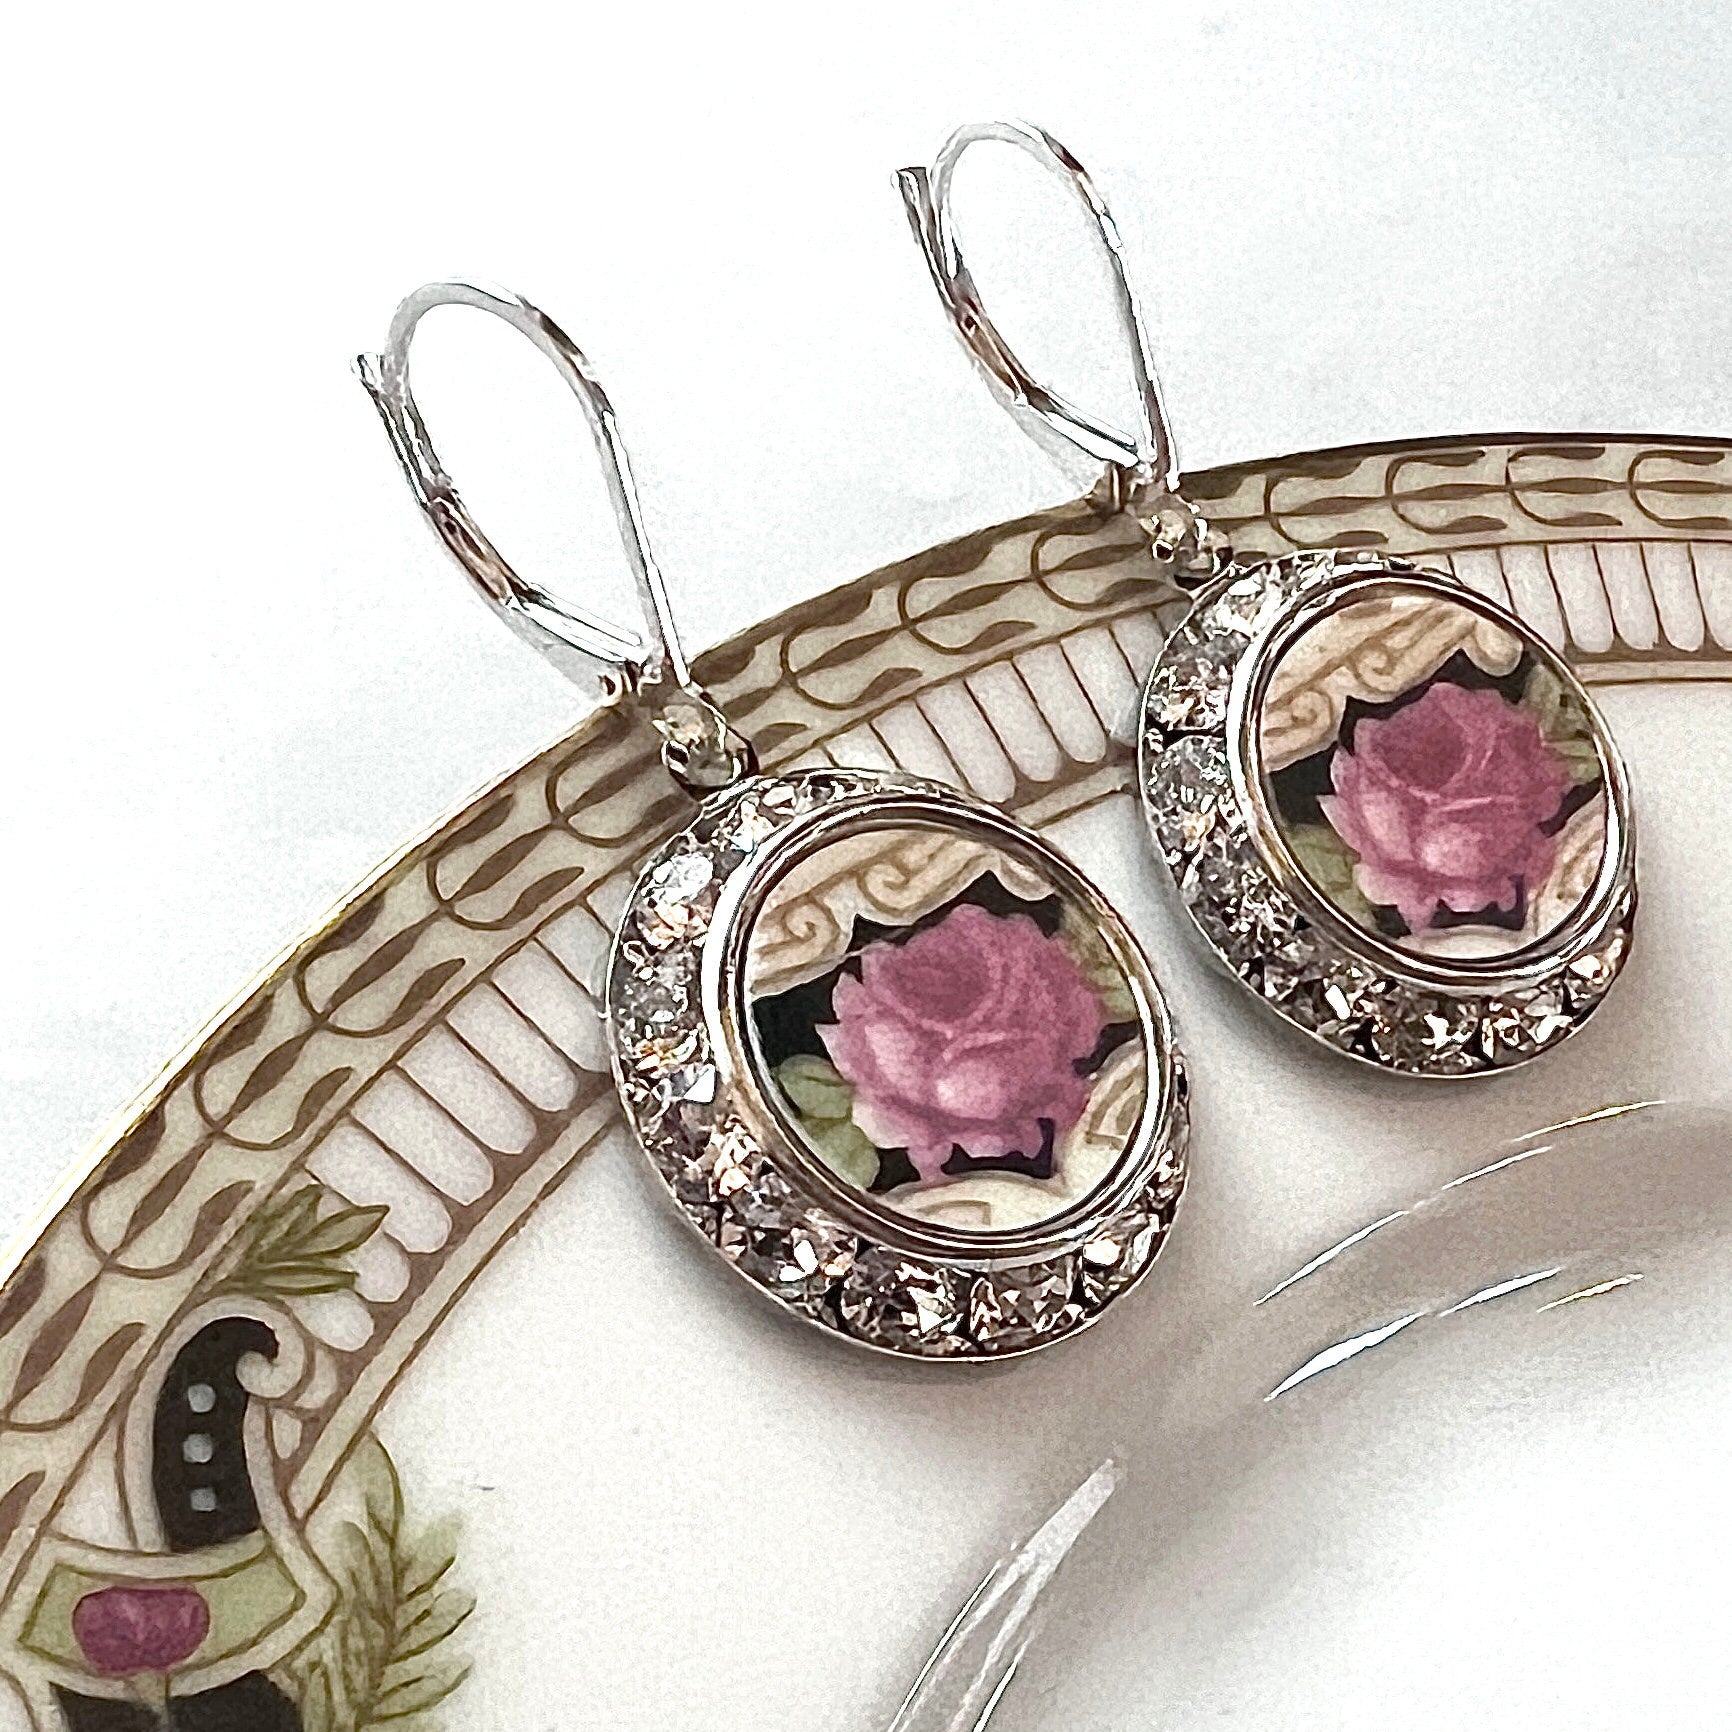 One of a Kind, Broken China Jewelry Crystal Earrings, Statement Flower Earrings for Women, Unique Gifts for Her